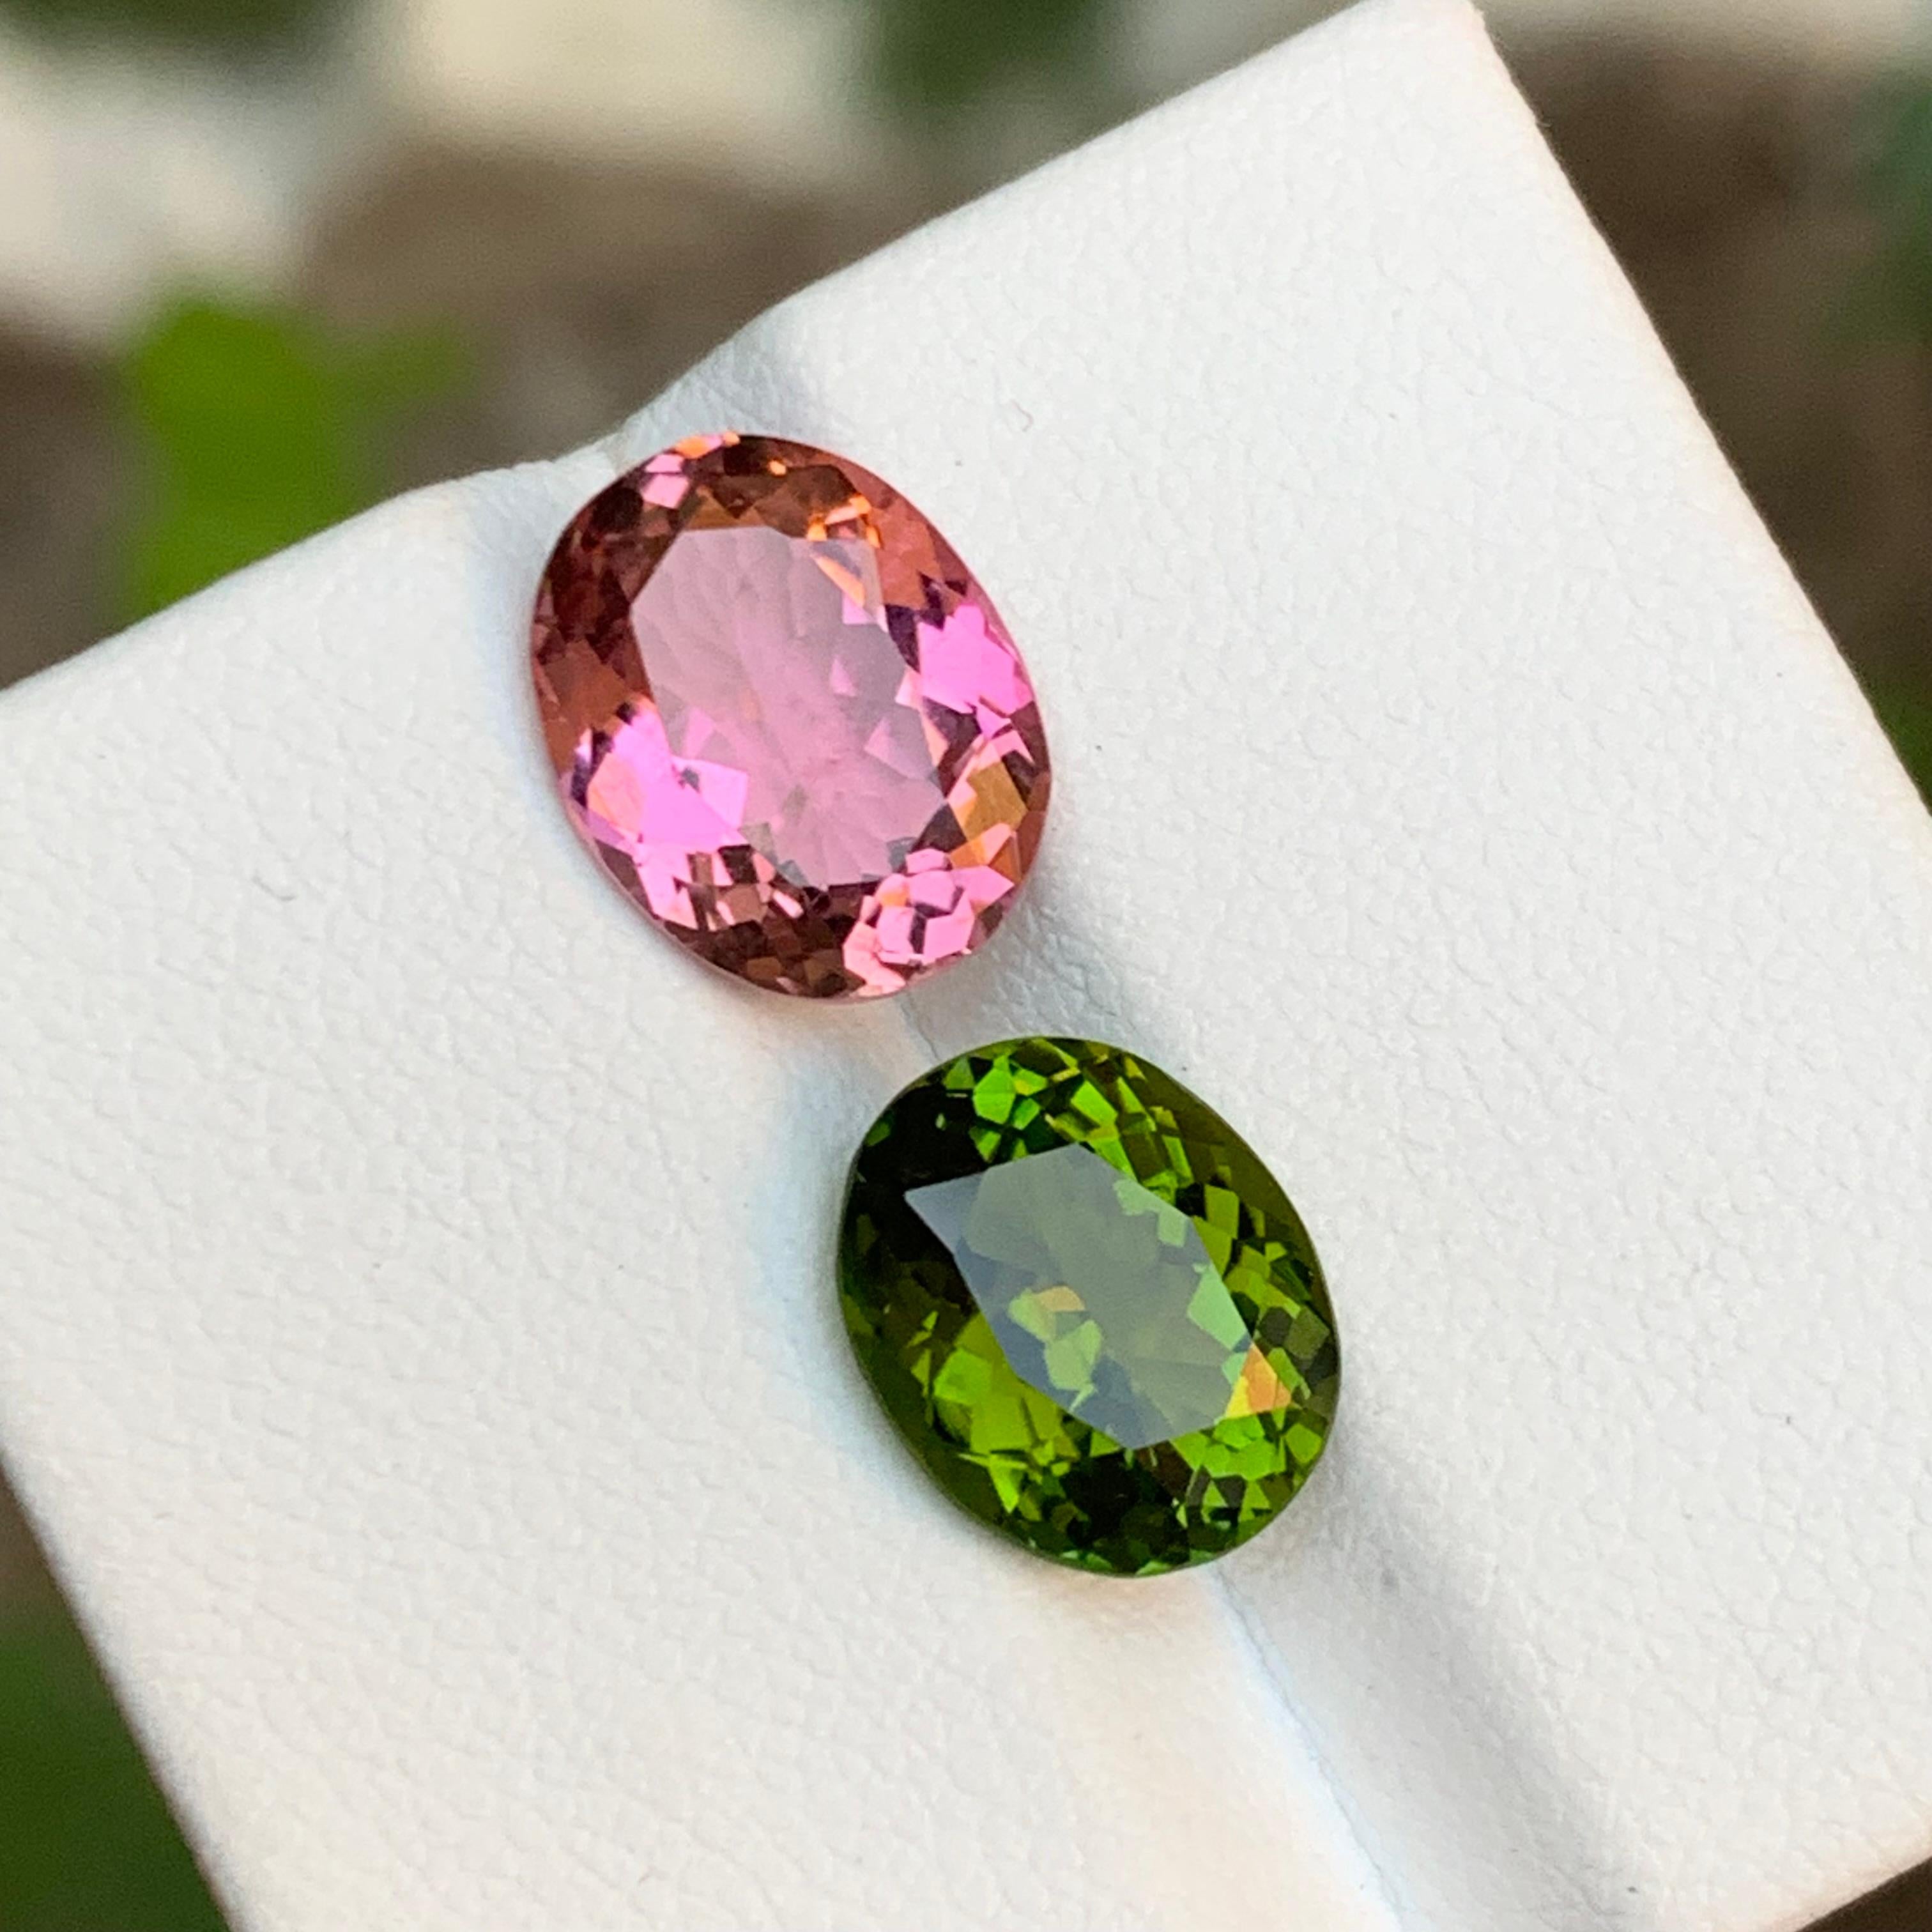 GEMSTONE TYPE: Tourmaline
PIECE(S): 2
WEIGHT: 5.25 Carats
SHAPE: Oval Cushion Cut
SIZE (MM): 
Pink: 2.75 Carat= 10.58 x 8.37 x 4.83
Green 2.50 Carat= 9.91 x 8.07 x 5.15
COLOR: Vivid Pink and Rich Green
CLARITY: Approx Eye Clean
TREATMENT: